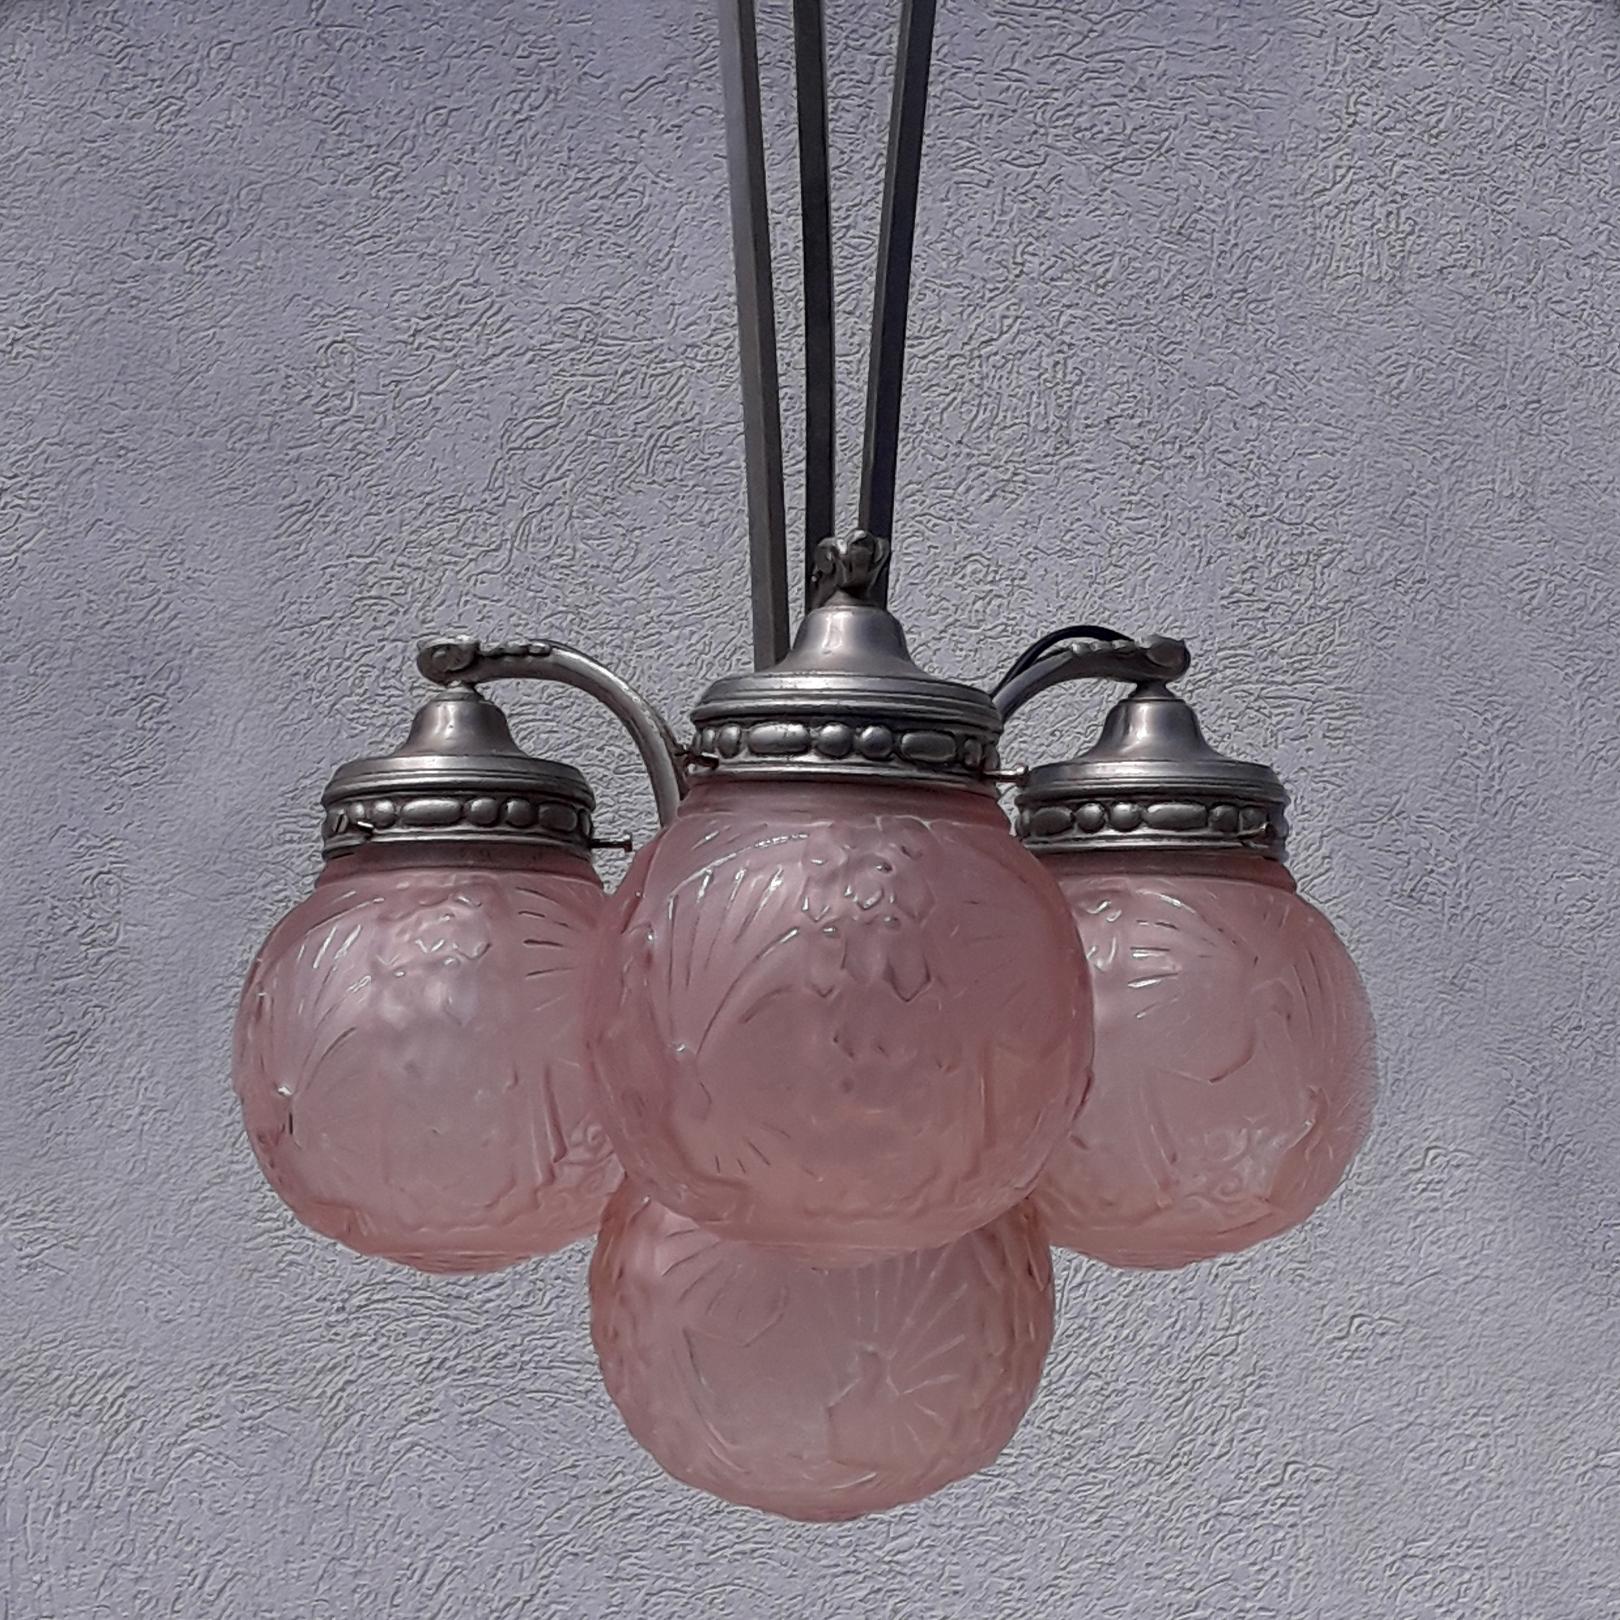 Muller Freres, Luneville chandelier, 1930s. Four pink glass globes, peacock and floral motif. Marked Muller Freres, Luneville on the collar and the globes.